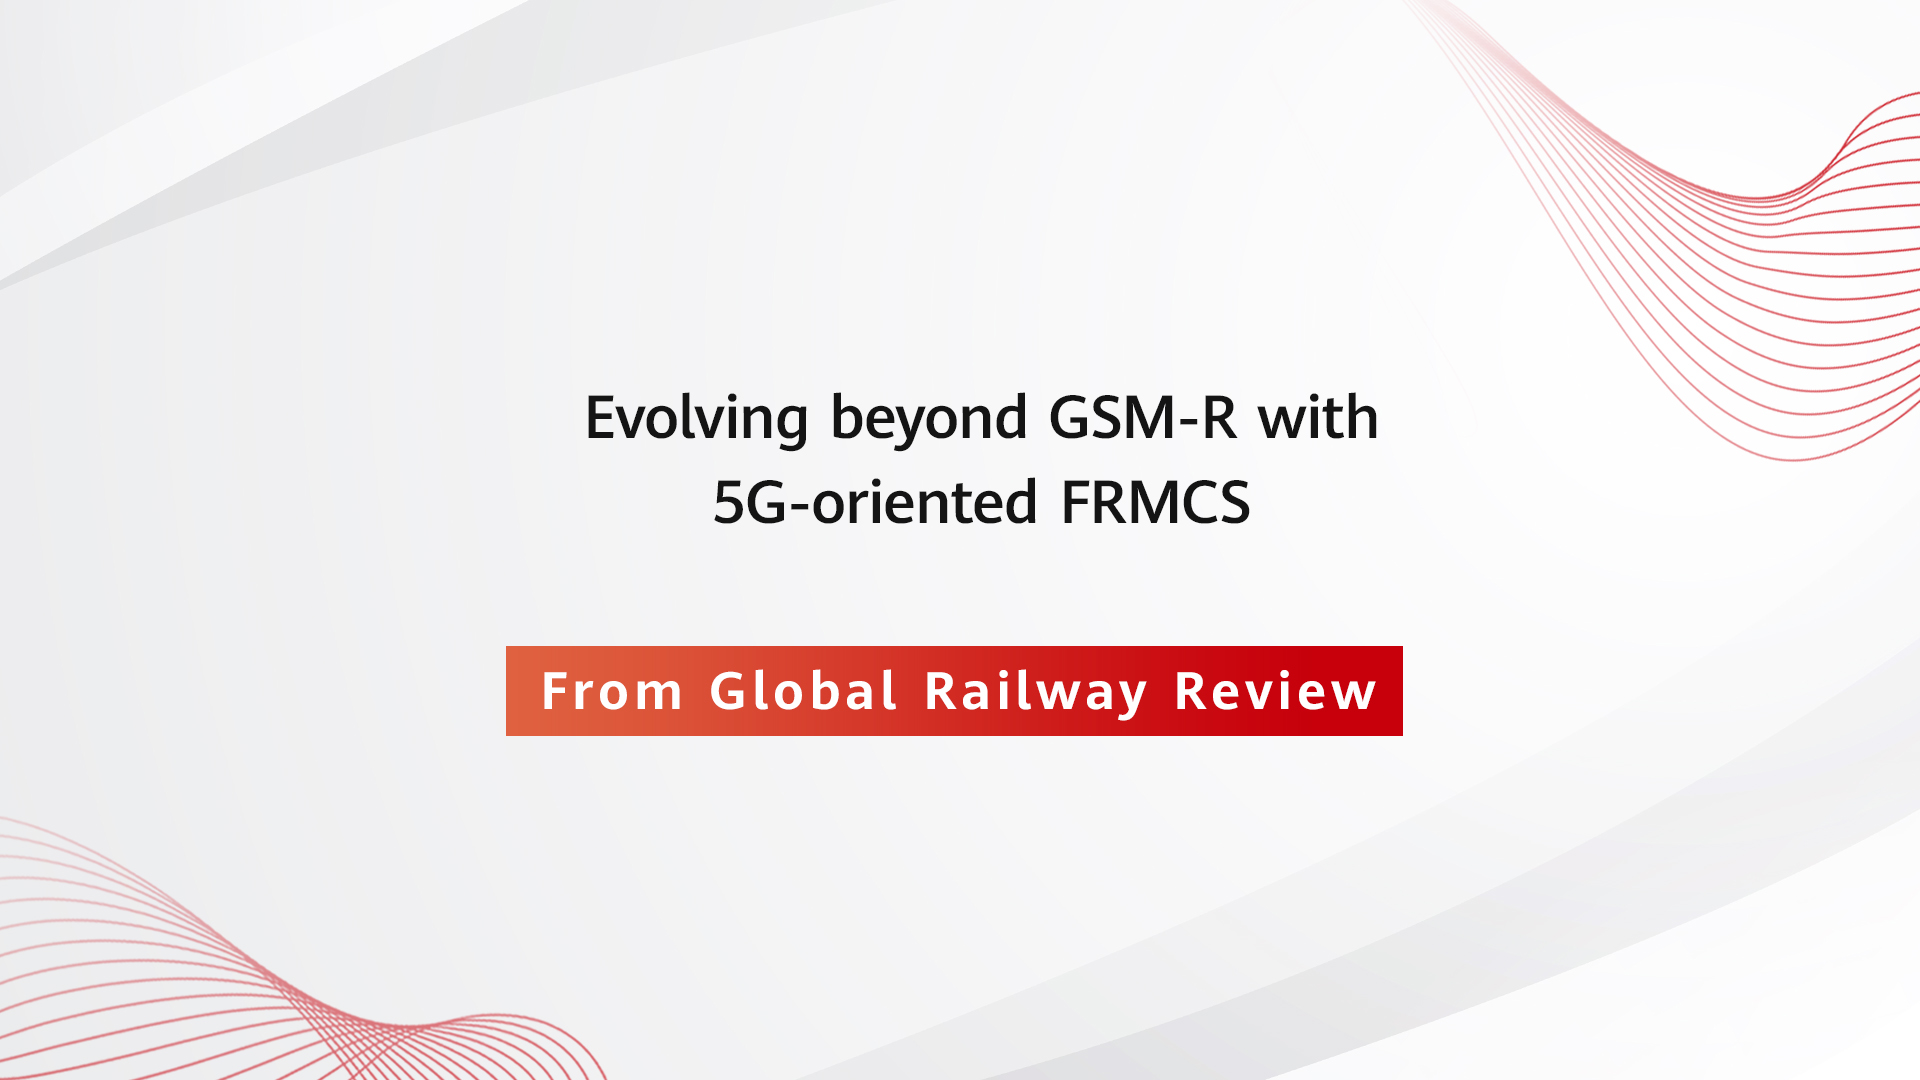 Evolving beyond GSM-R with 5G-oriented FRMCS